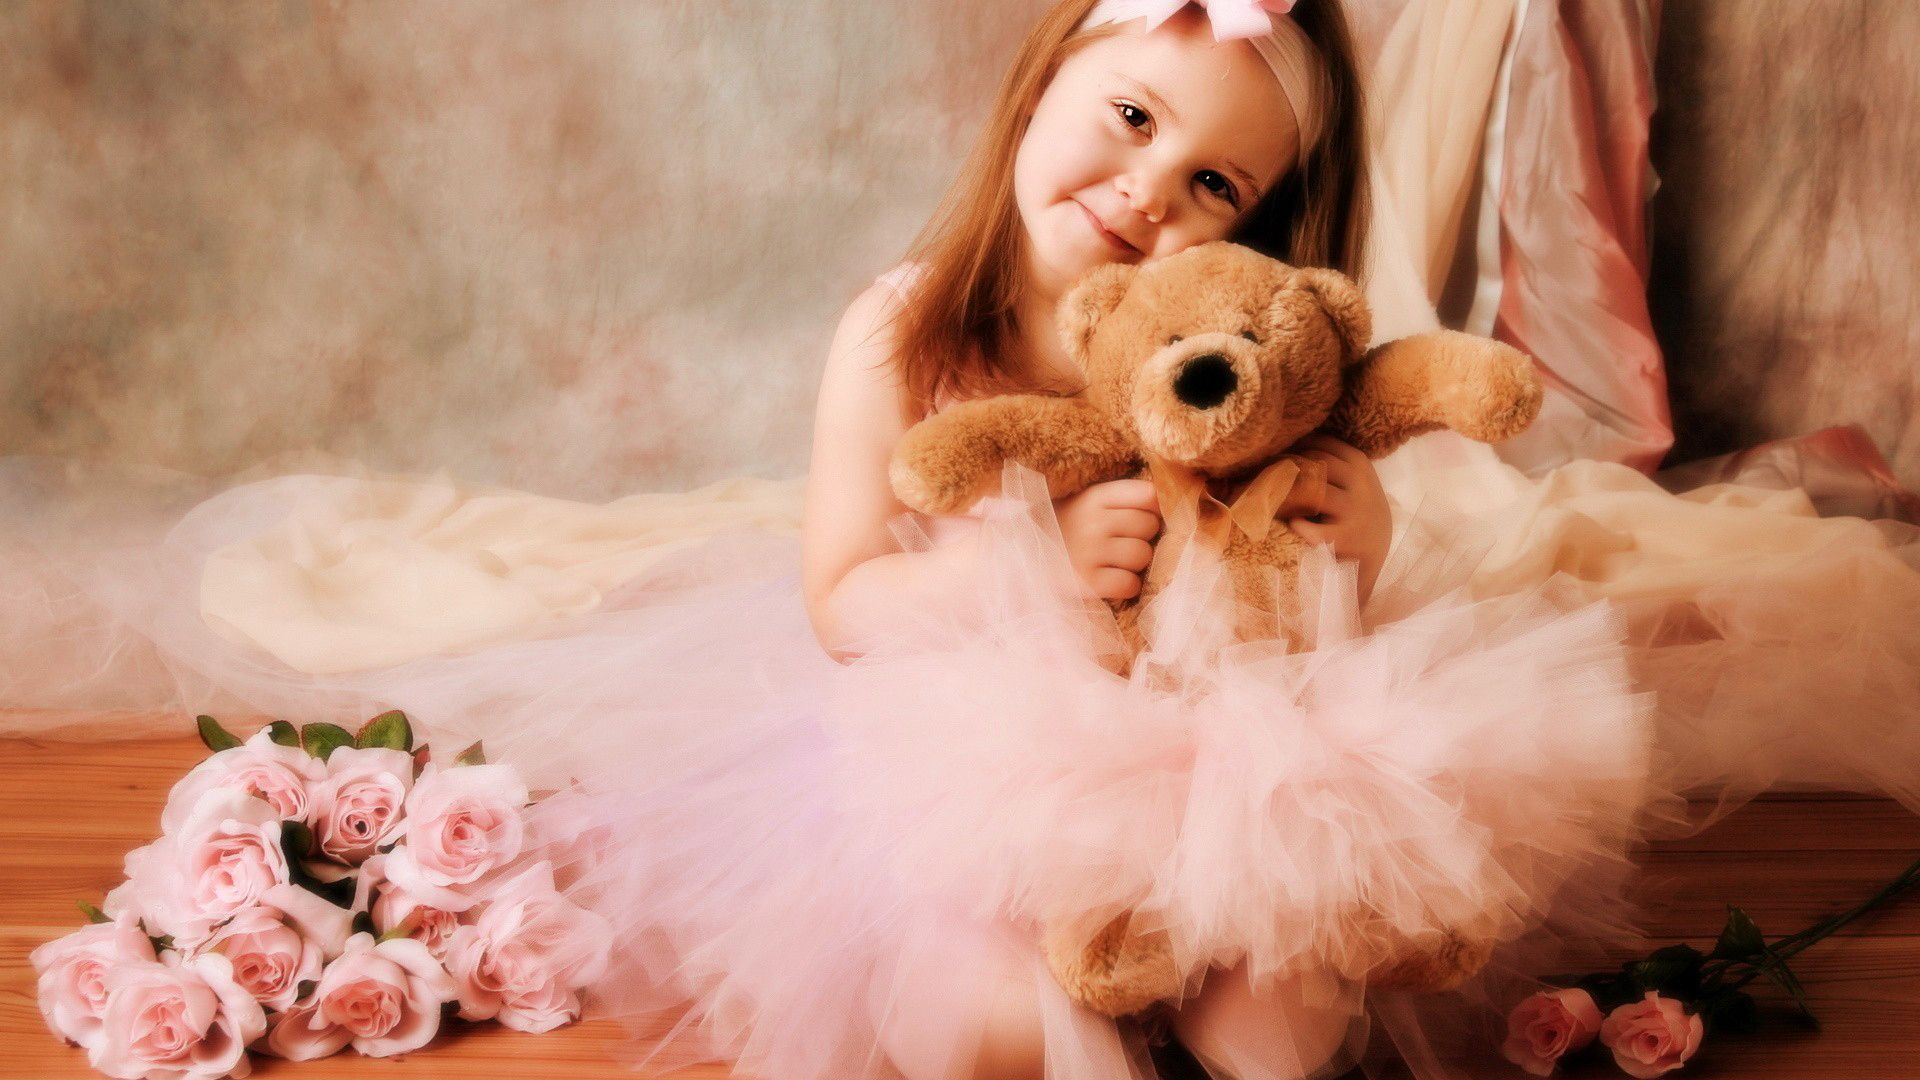 cute little girl with cute teddy pics | Get Latest Wallpapers